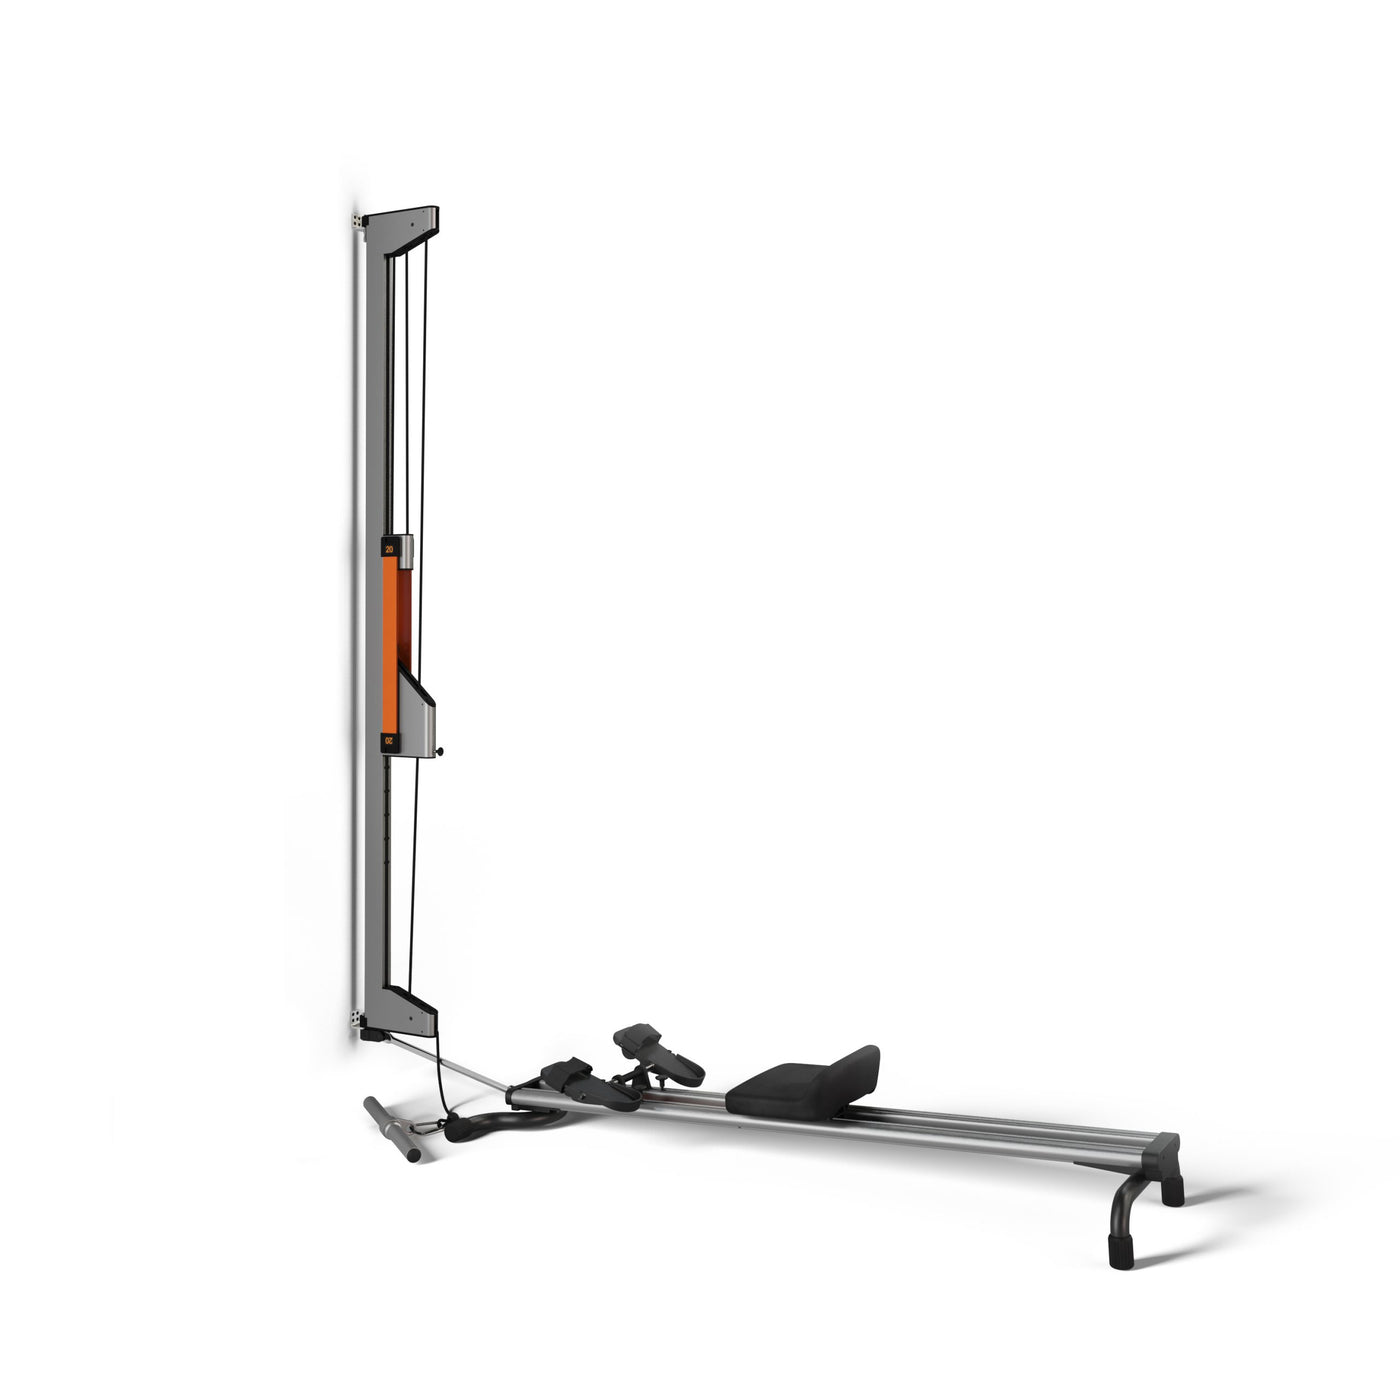 The TUT Trainer High Performance Total Home Gym Rower Combination